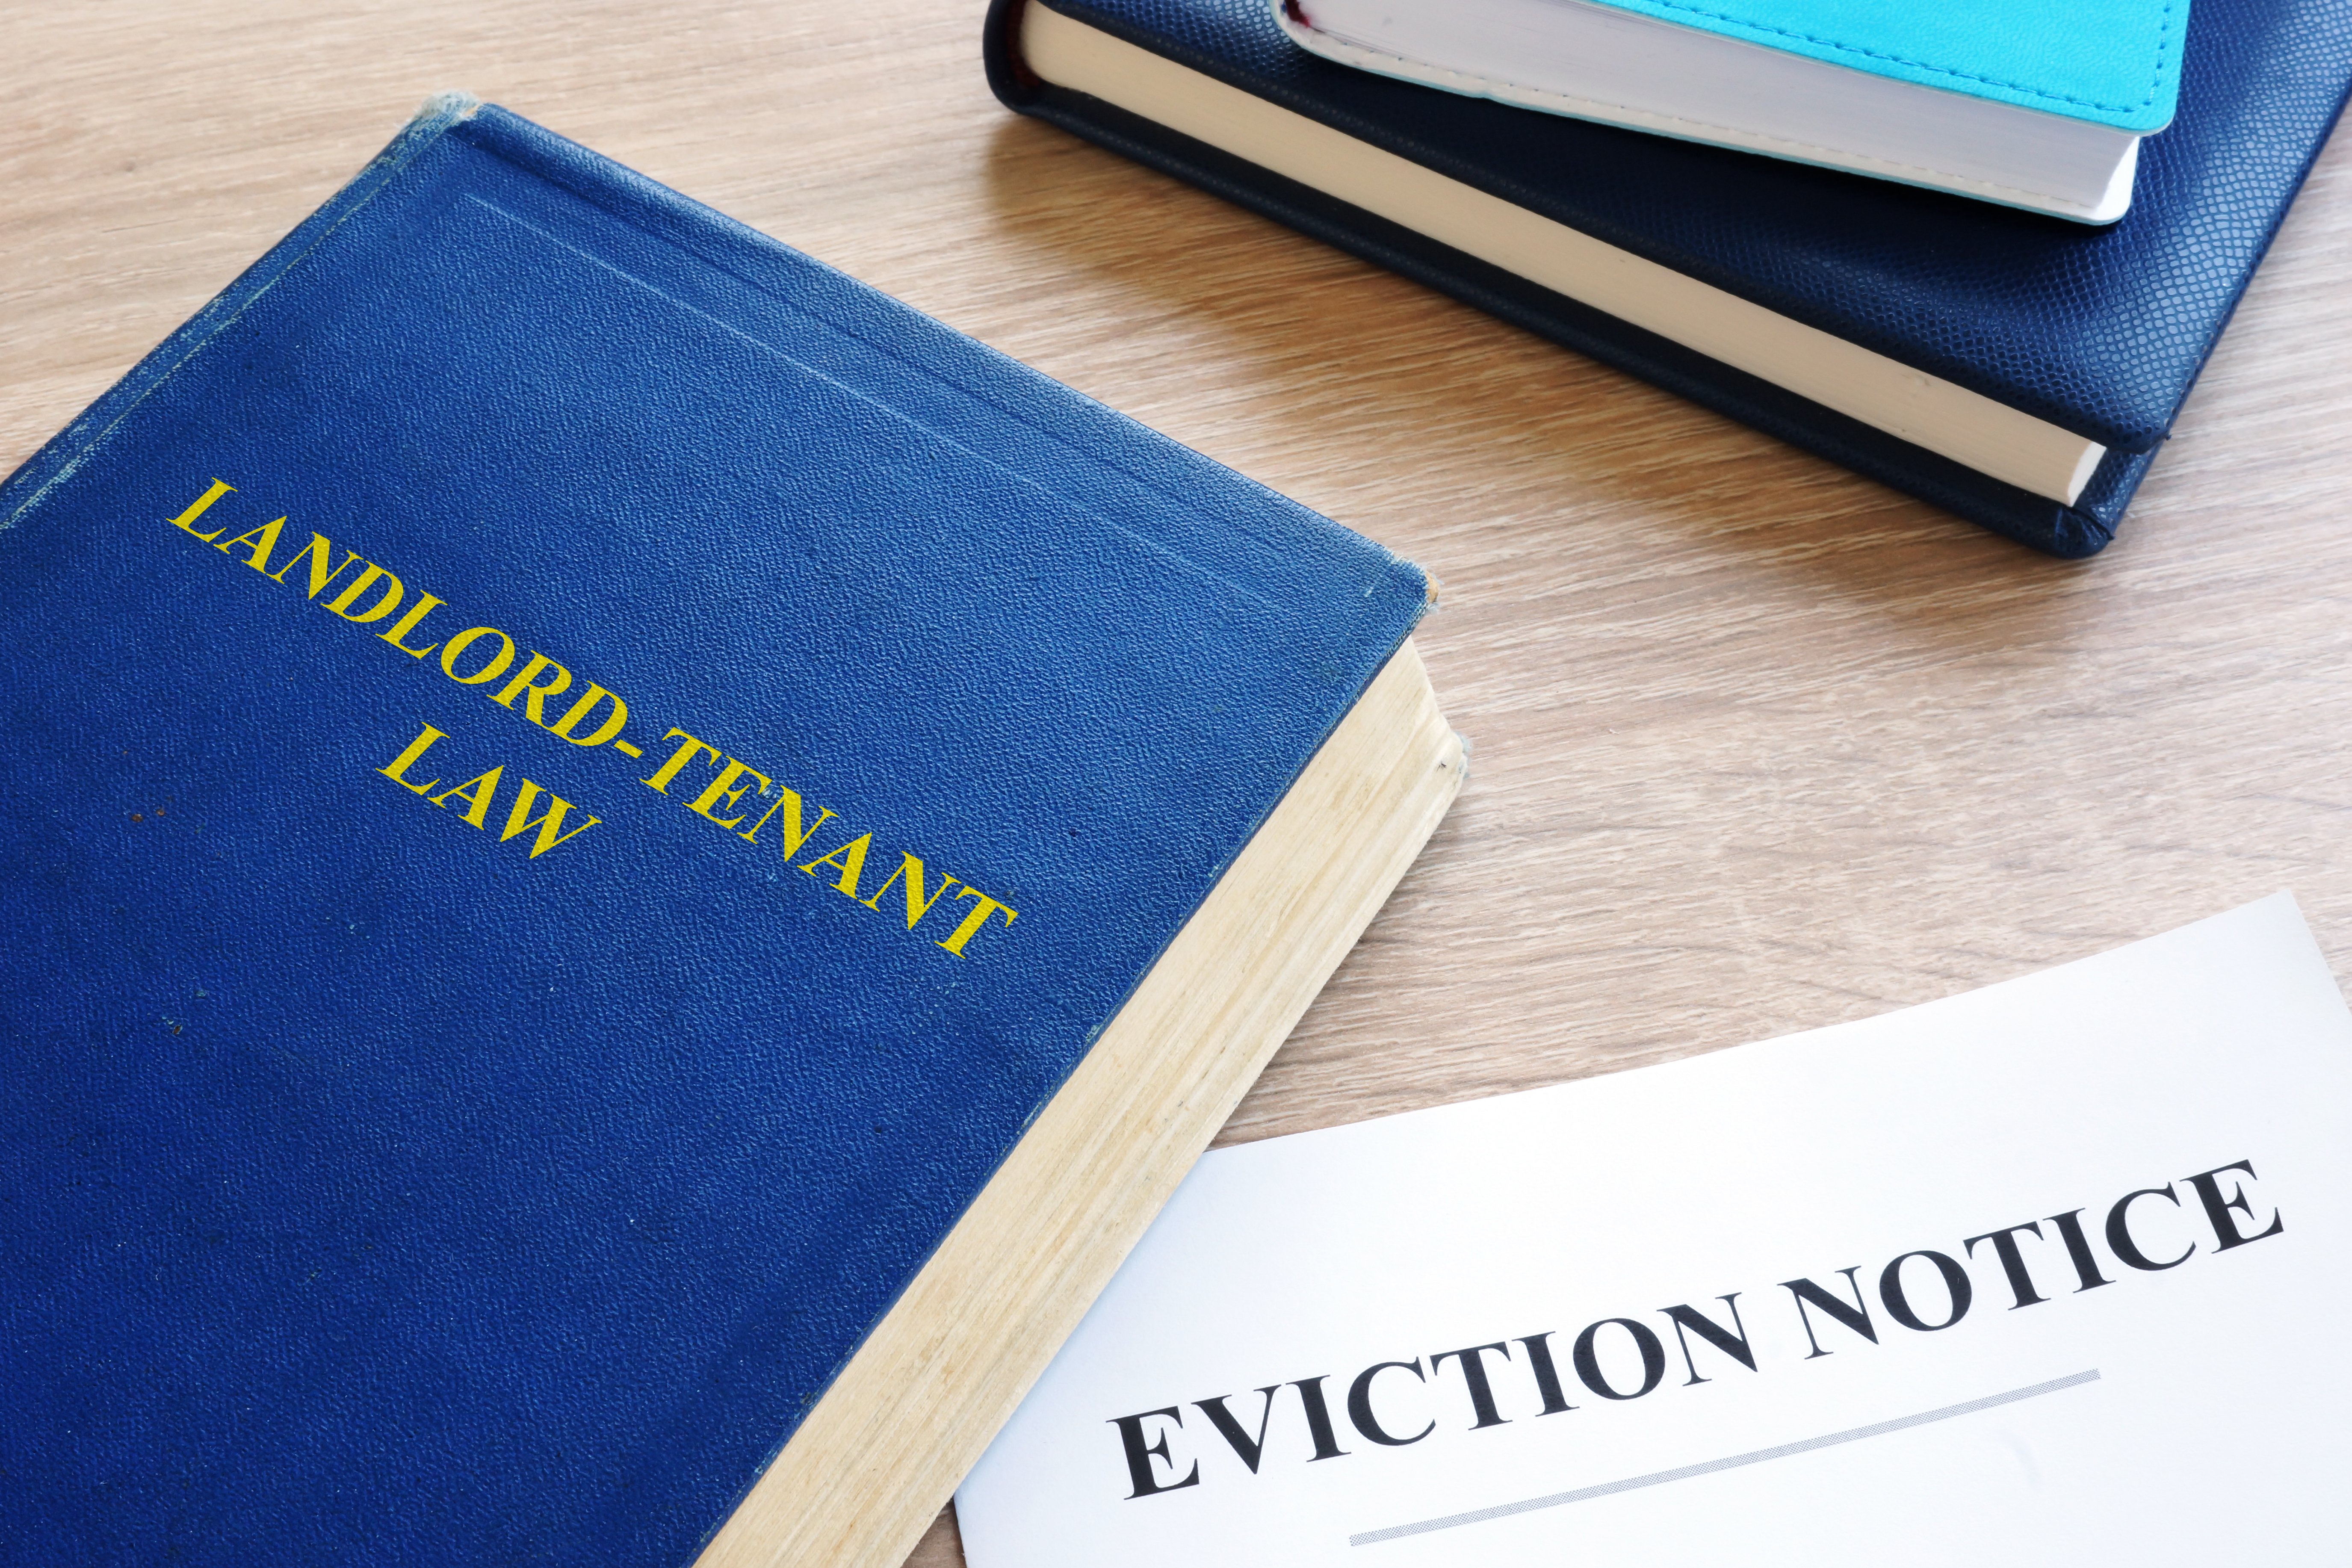 eviction notice and books